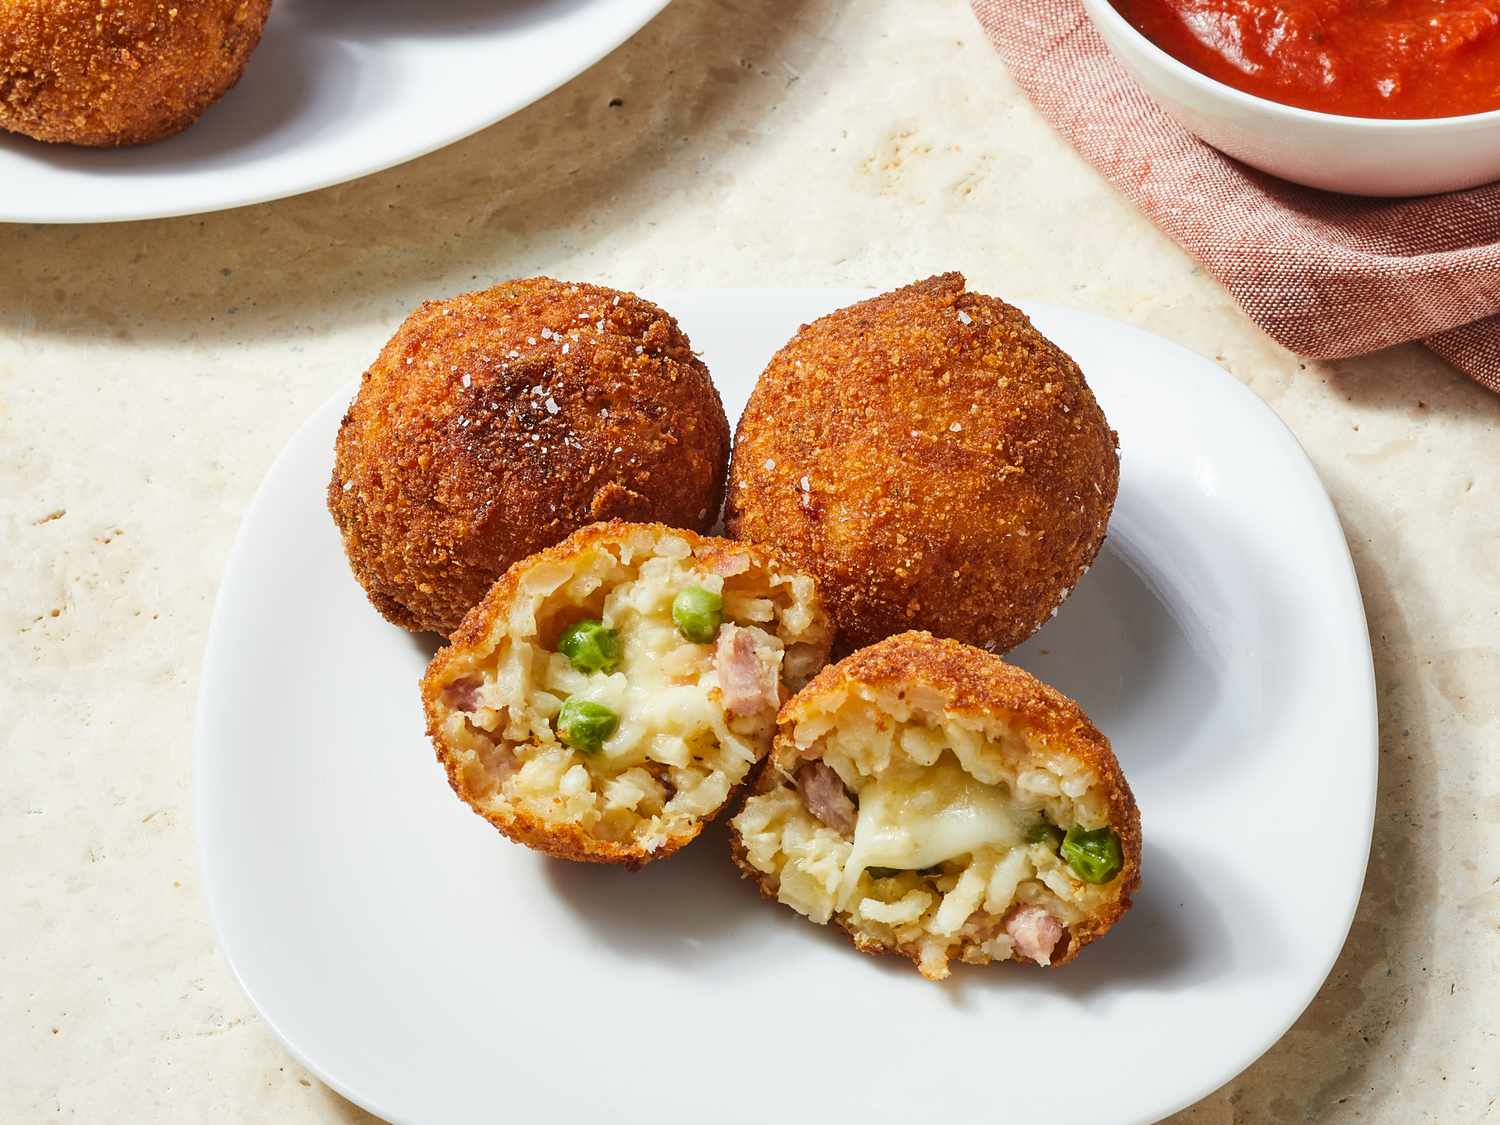 Arancini 4 All - Golden, Wholesome And So Delicious.